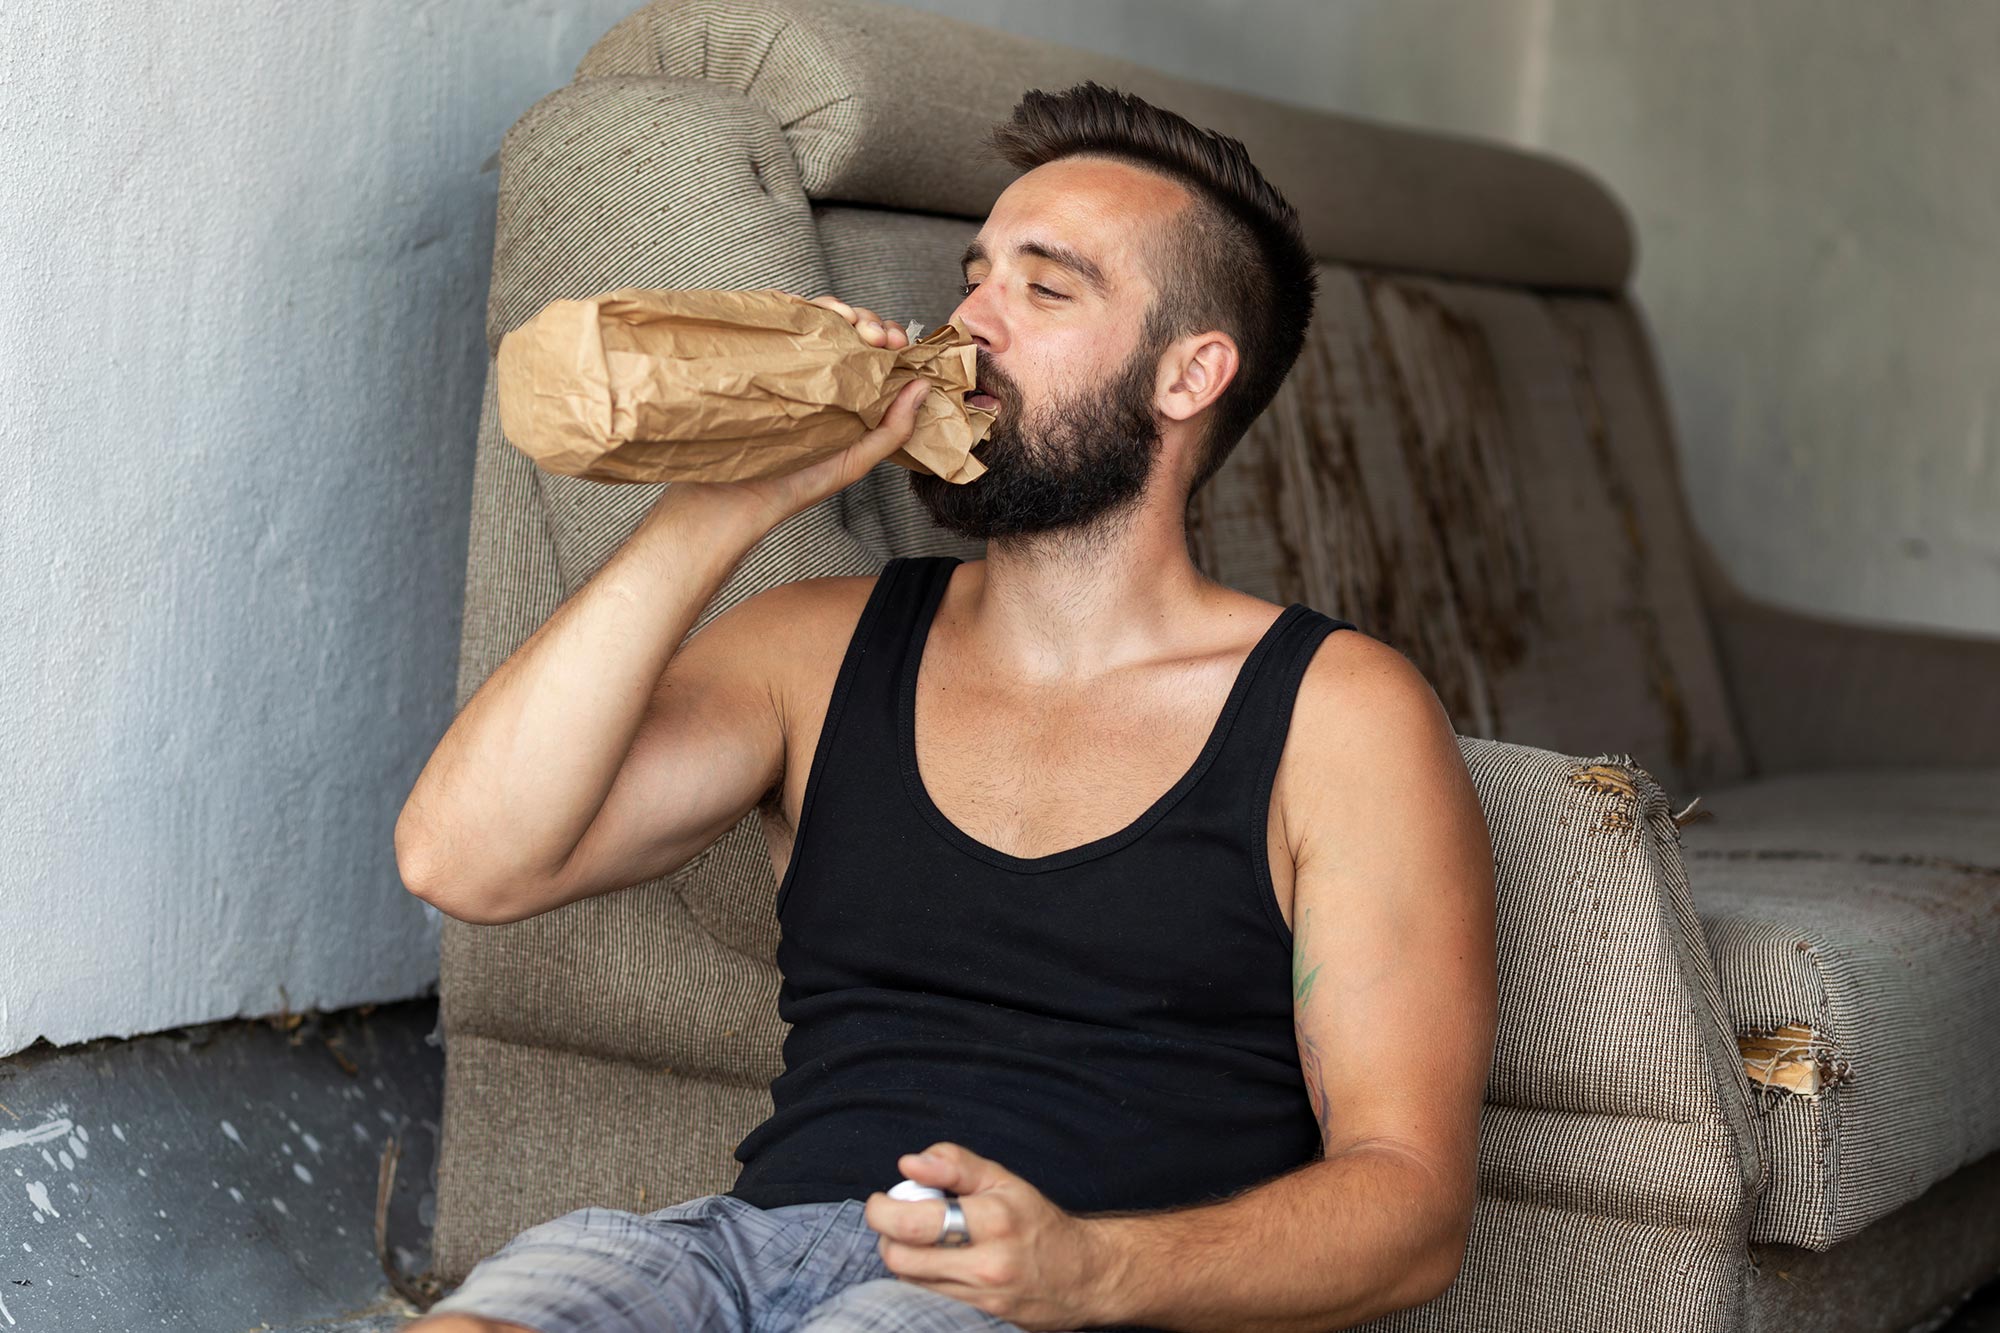 alcohol facts - facts about drinking - beard